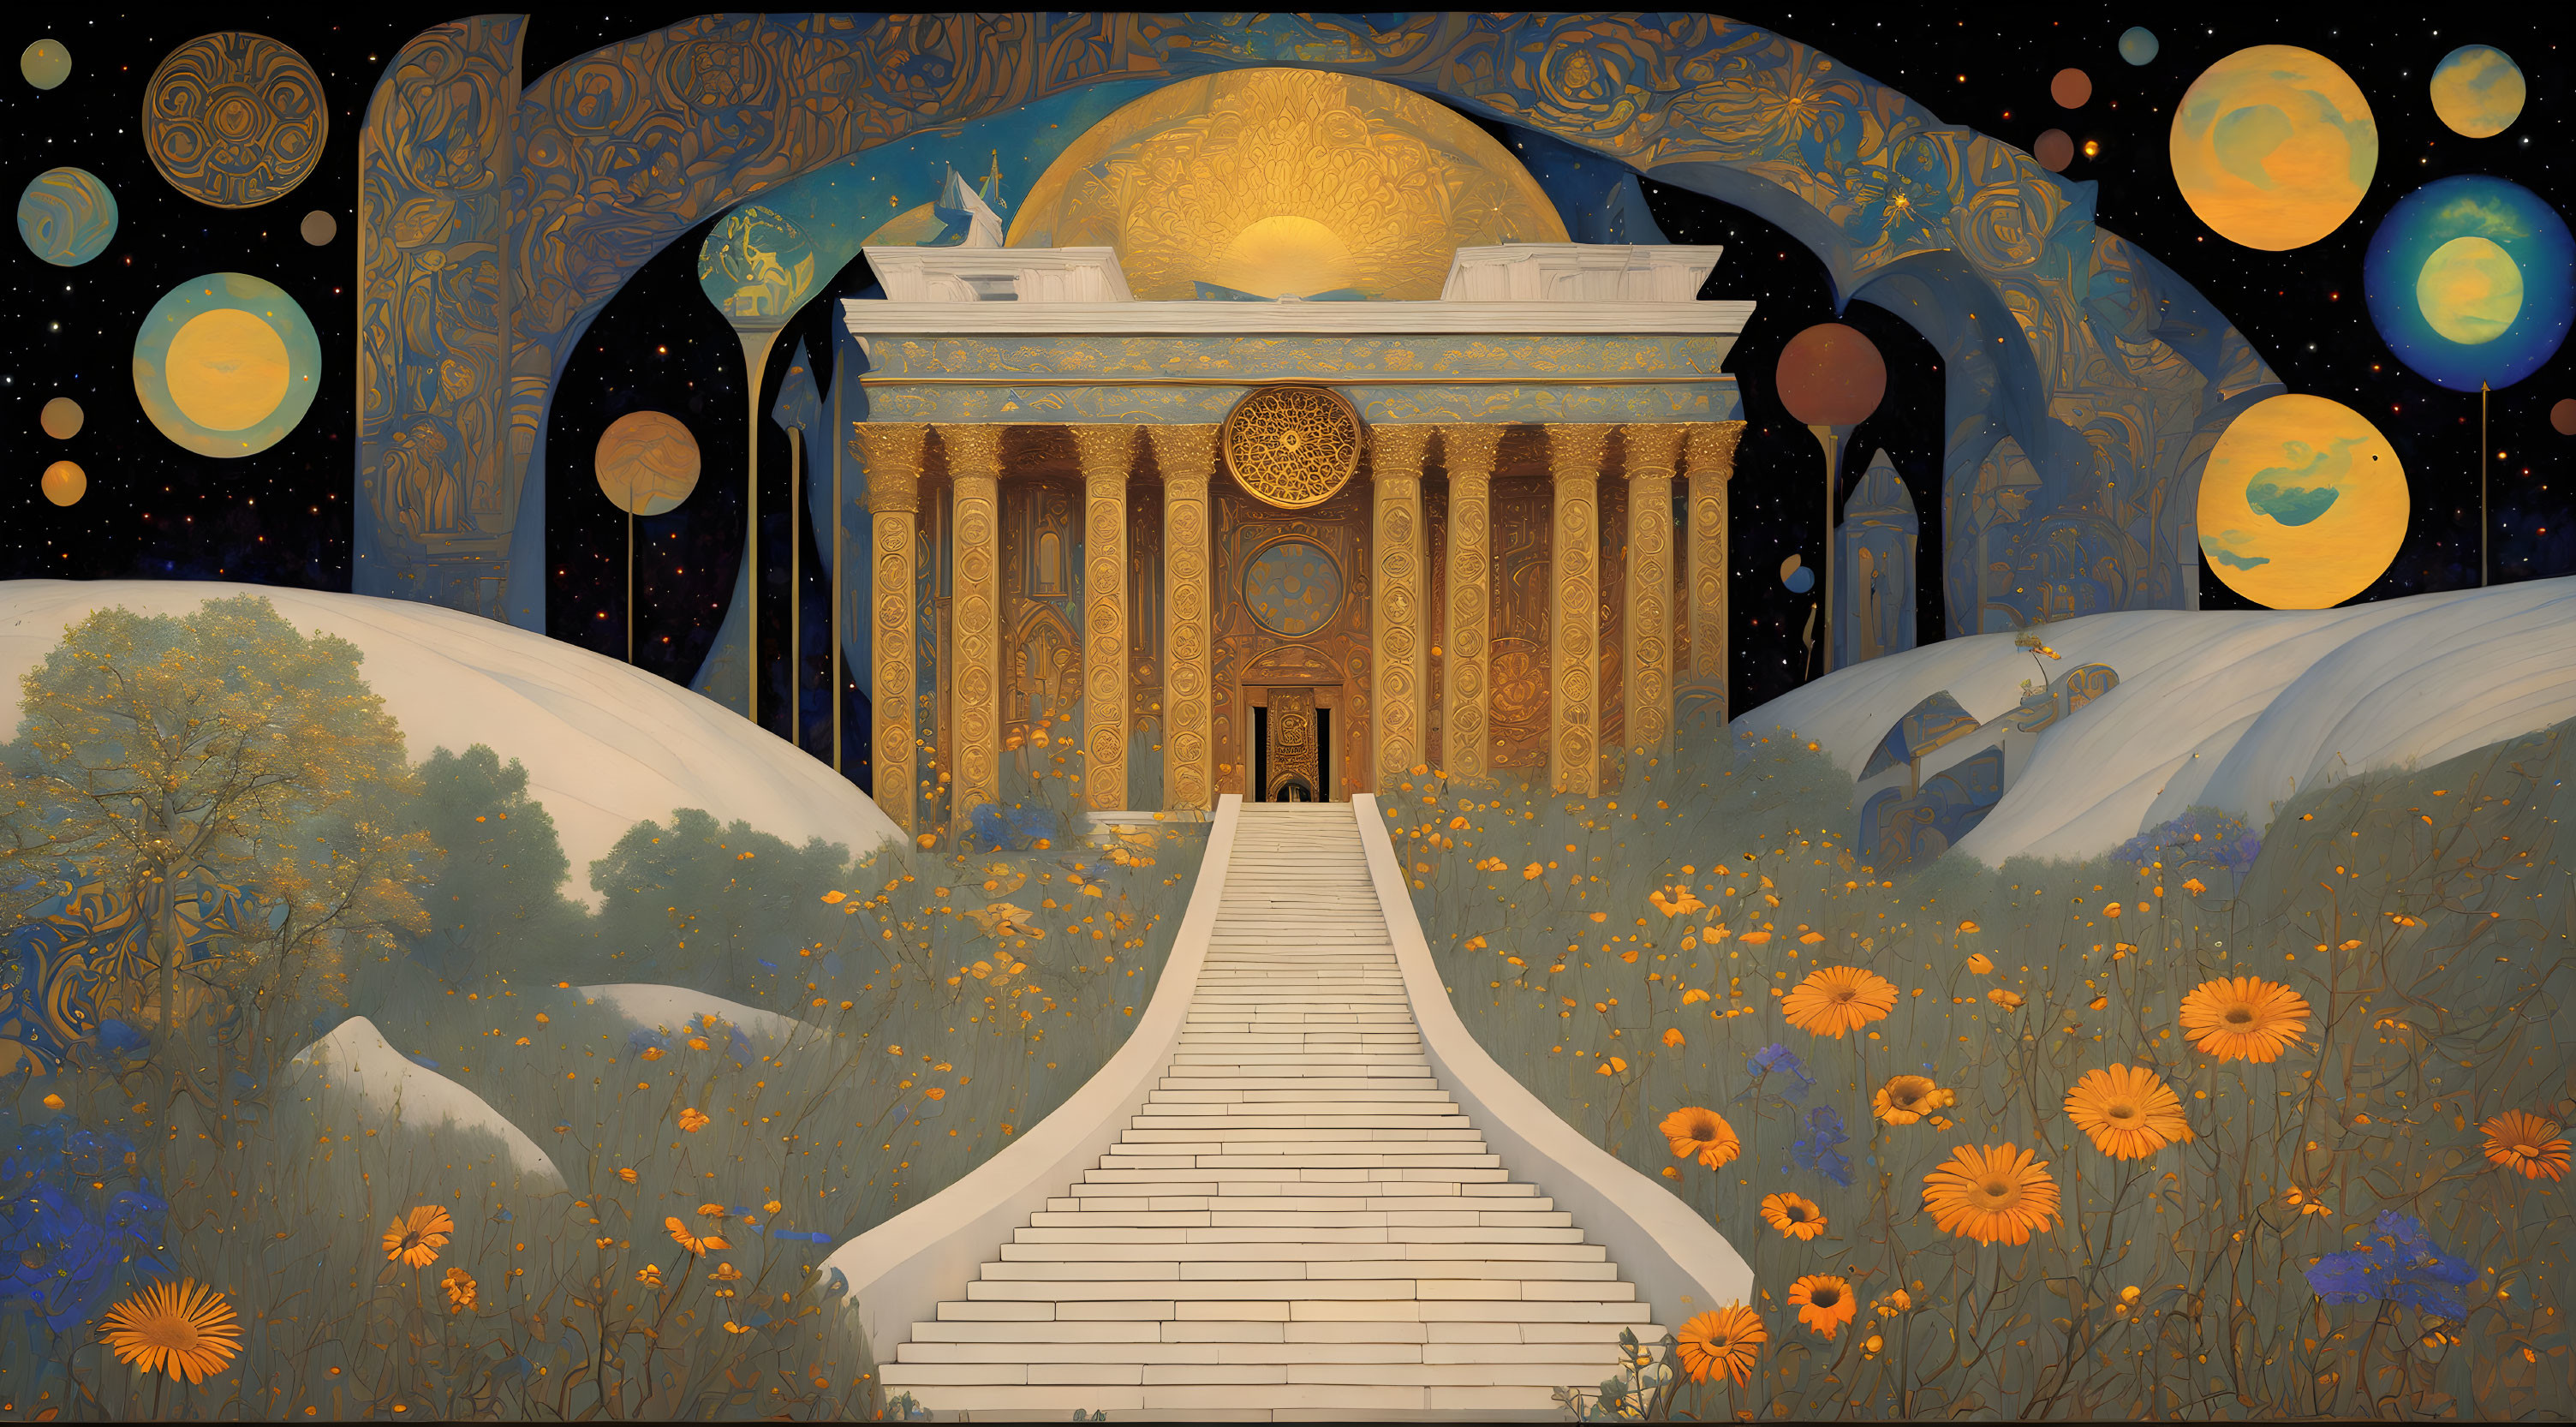 Classical Building with Golden Dome in Night Sky Landscape